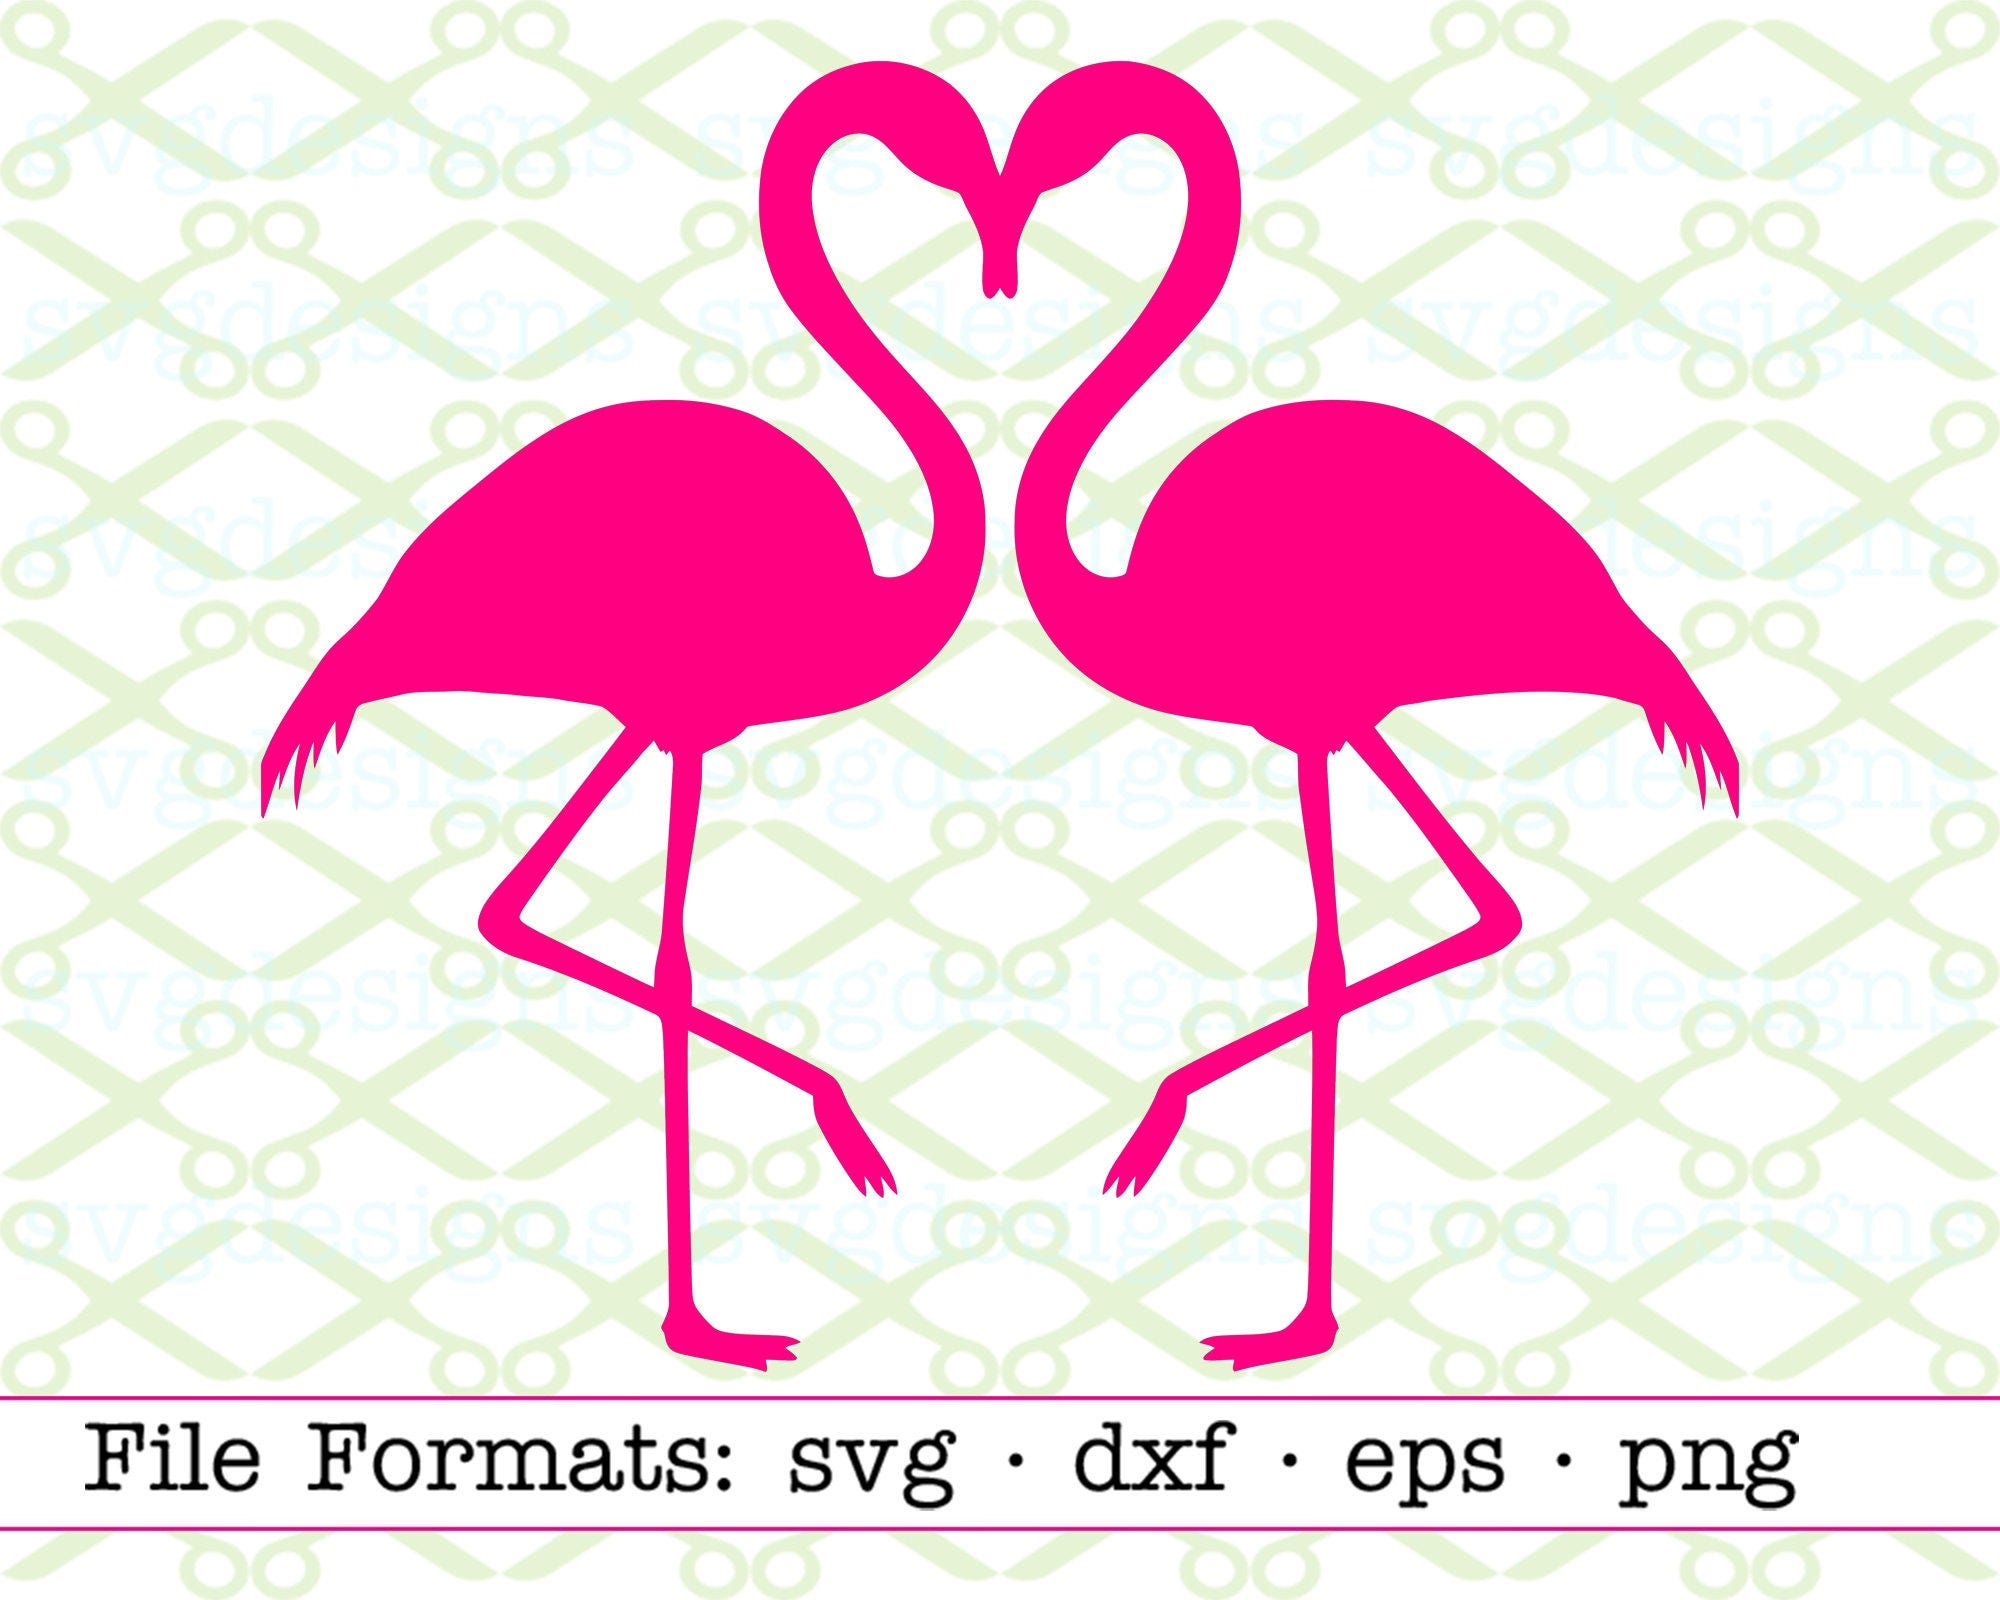 TWO FLAMINGOS Heart SVG, Dxf, Eps & Png.  Digital Cut Files for Cricut, Silhouette; Love Svg, Valentine Heart Silhouette, Flamingo Svg